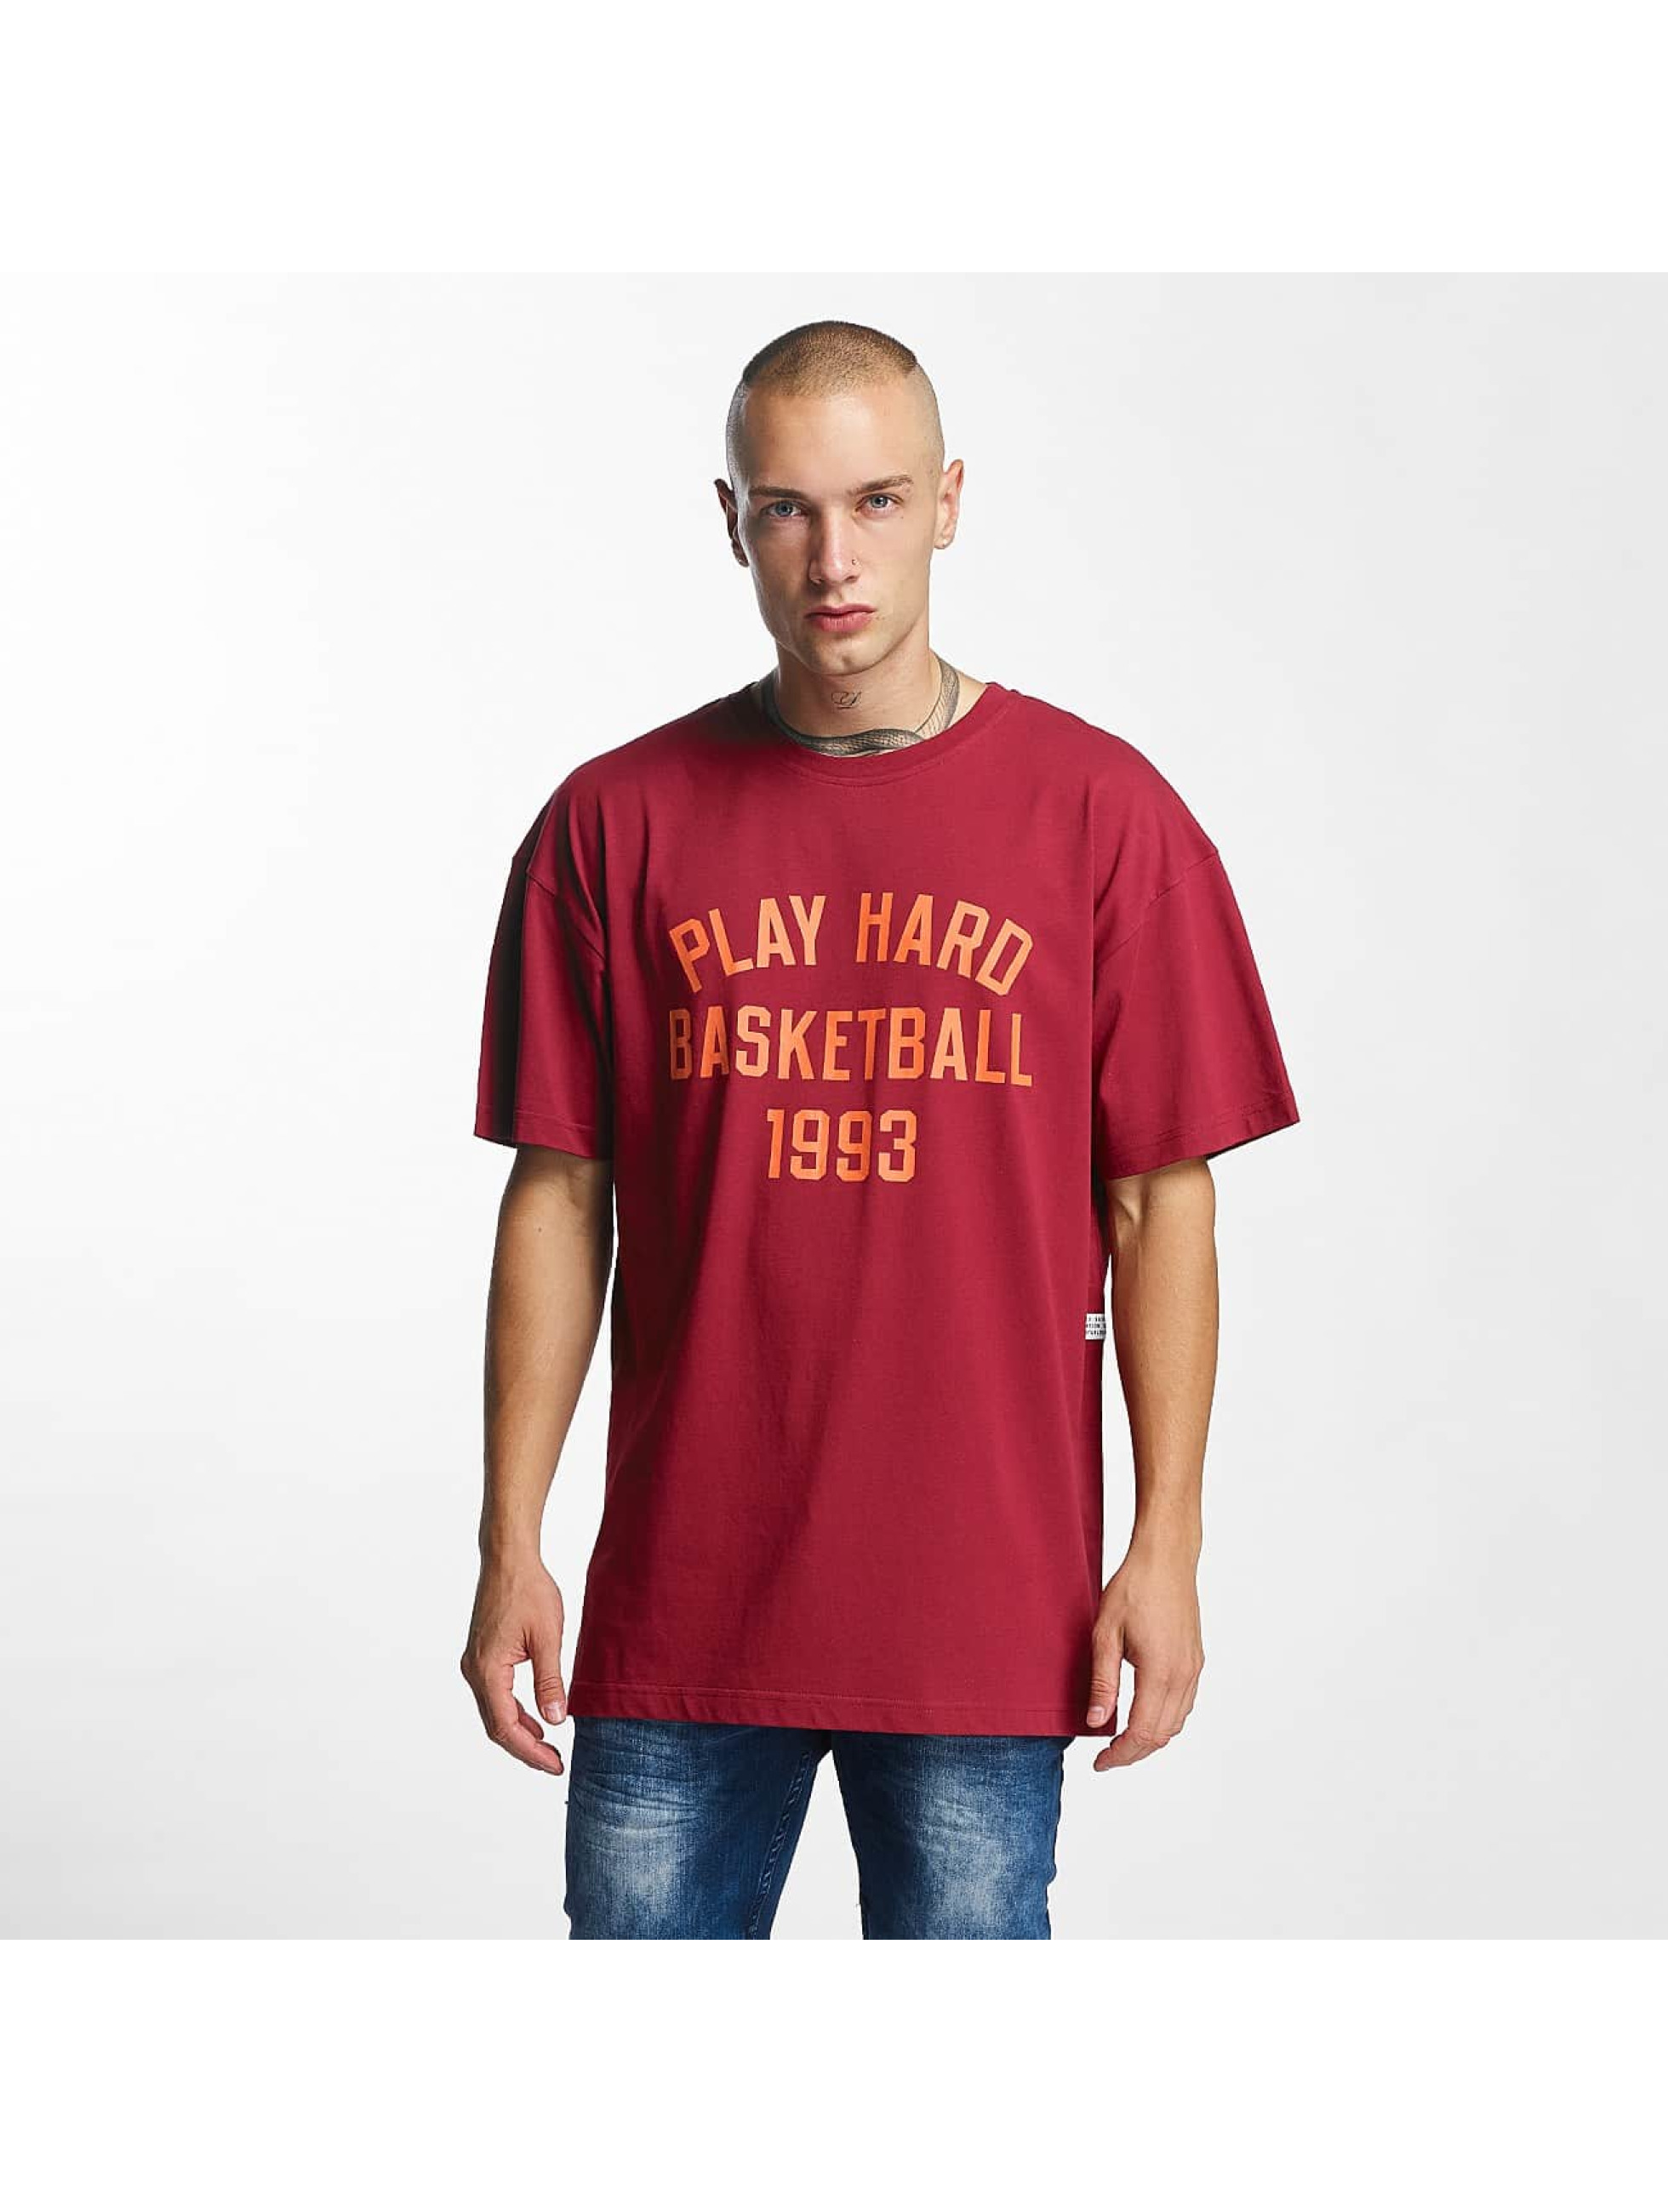 K1X Play Hard Basketball rouge T-Shirt homme